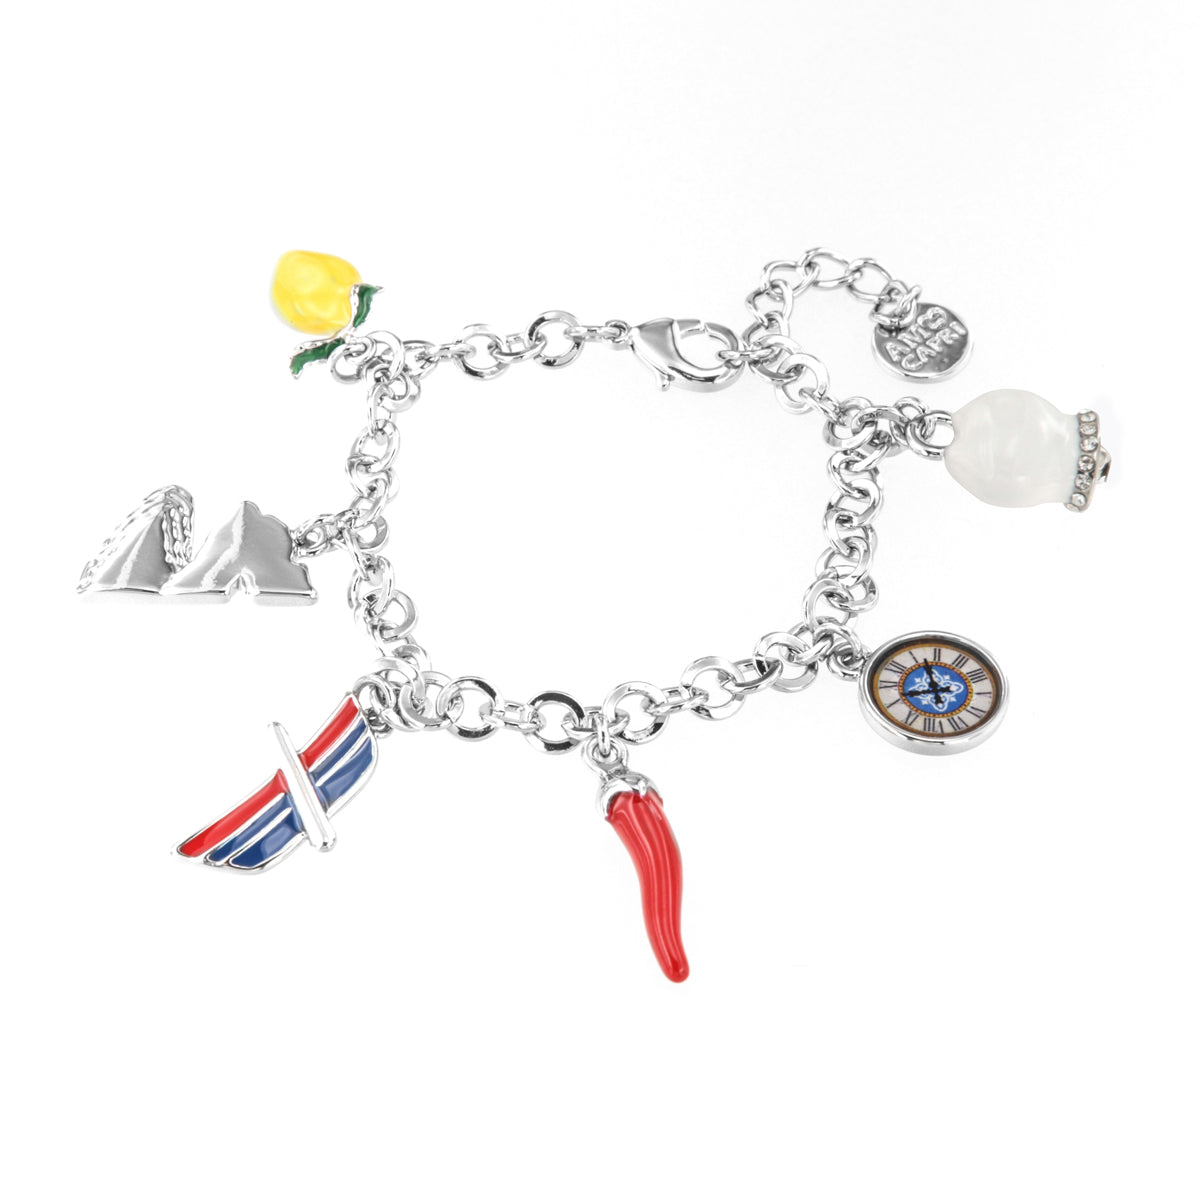 Metal bracelet with charms inspired by the island of Capri, embellished with colored enamels and crystals